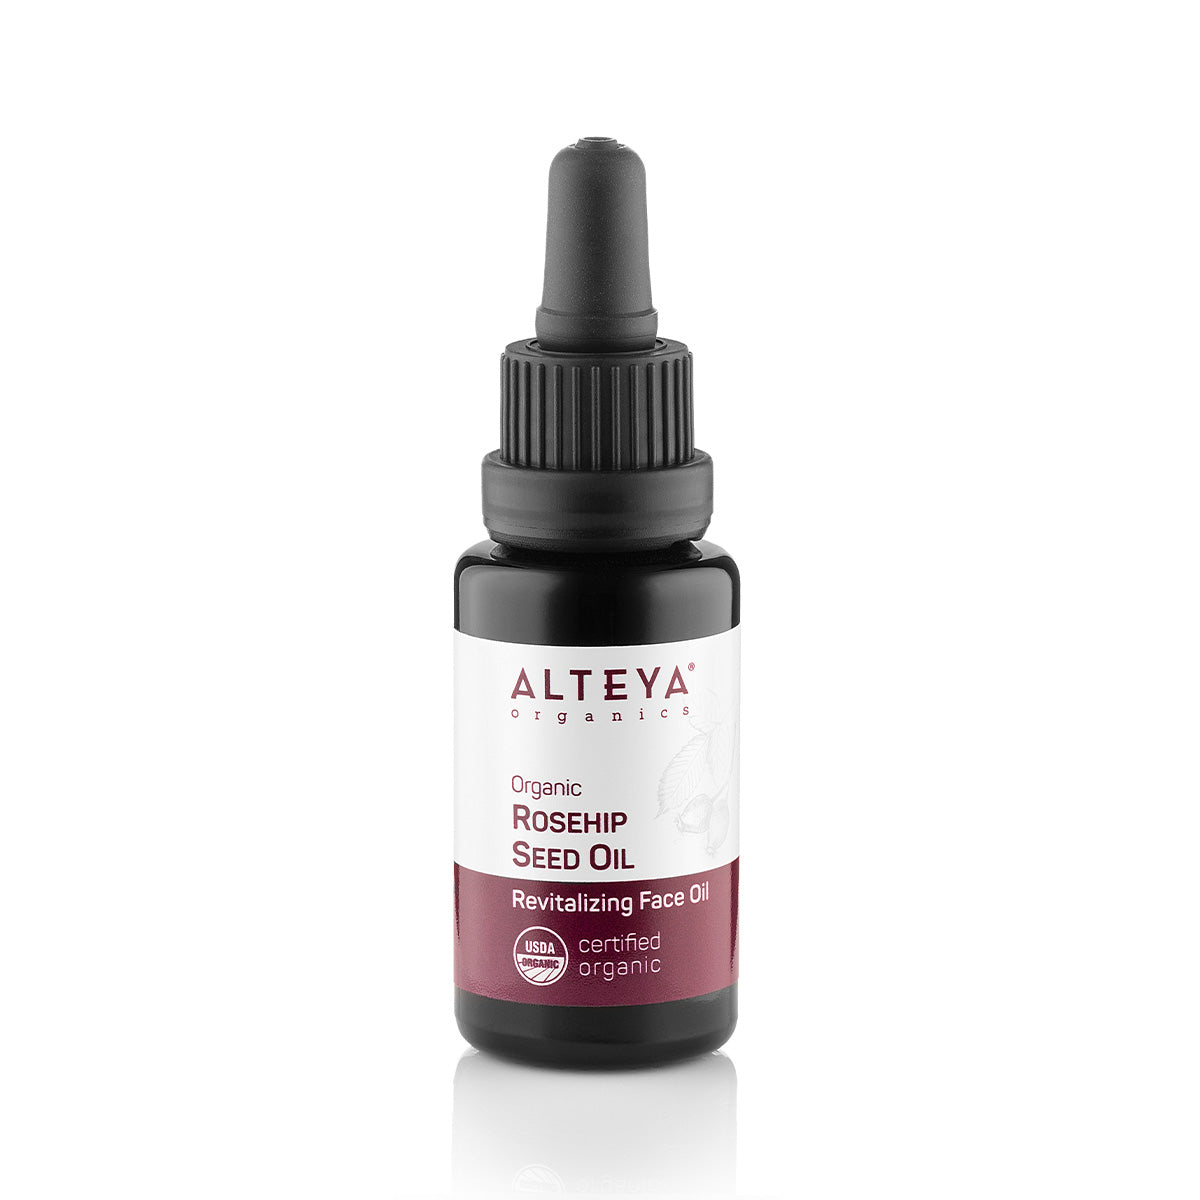 A bottle of Alteya Organics Organic Rose Hip Seed Oil - 0.68 Fl Oz, perfect for dry, sagging, or demanding skin prone to skin damage and wrinkles, showcased on a clean white background.